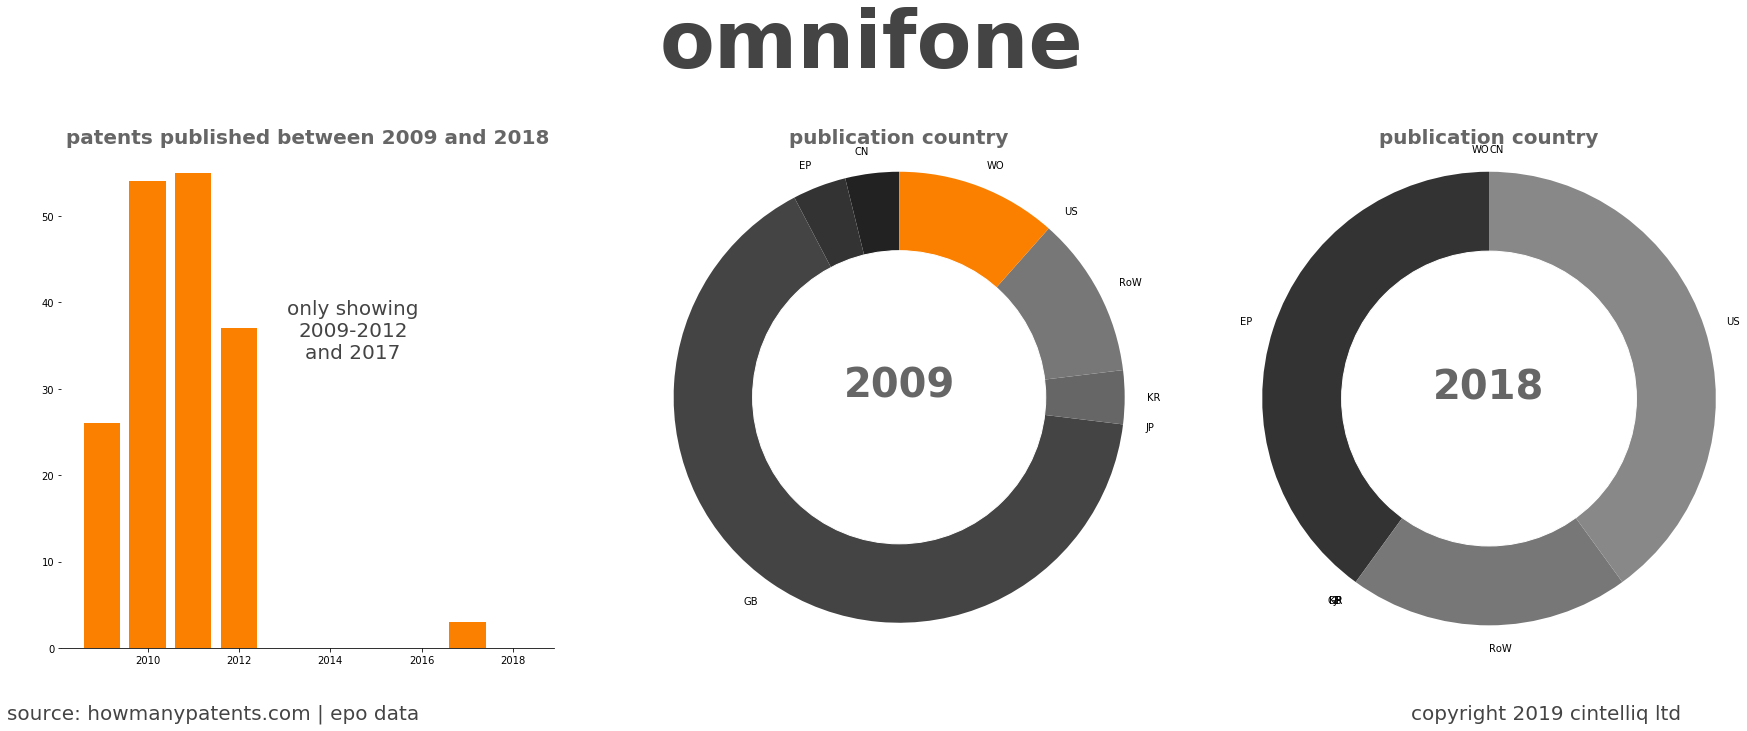 summary of patents for Omnifone